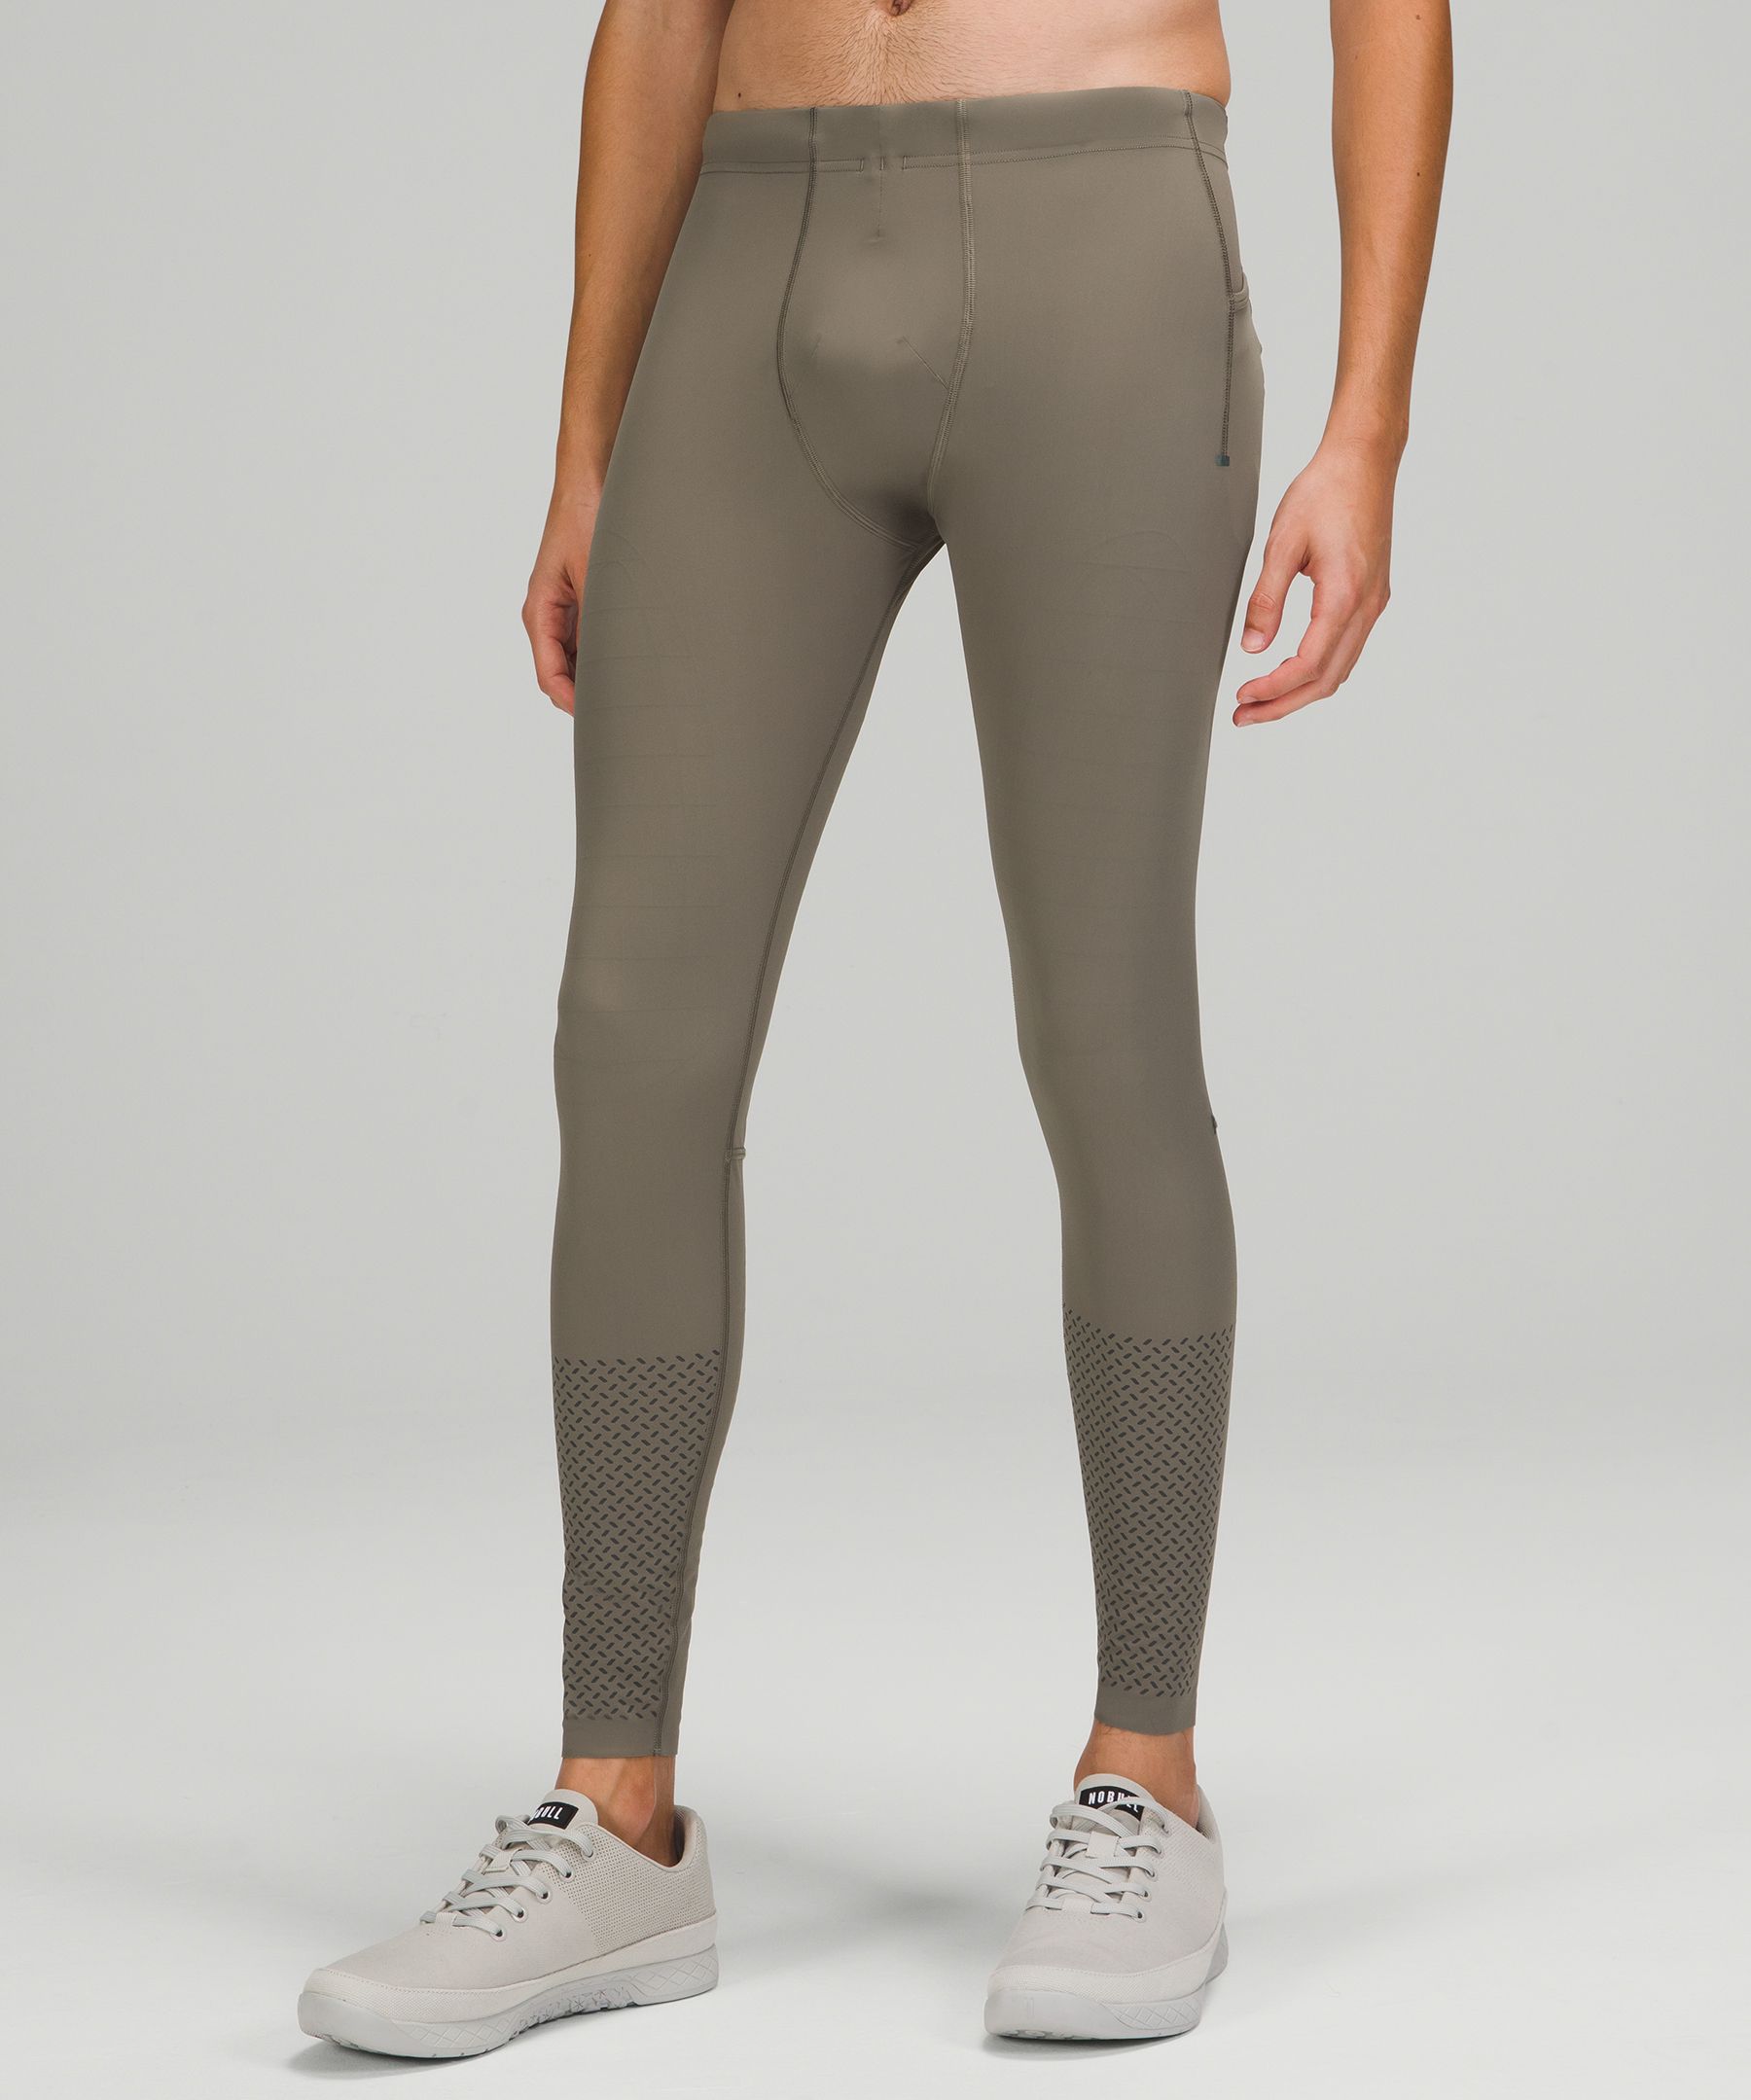 Lululemon Vital Drive Training Tights 28" In Rover